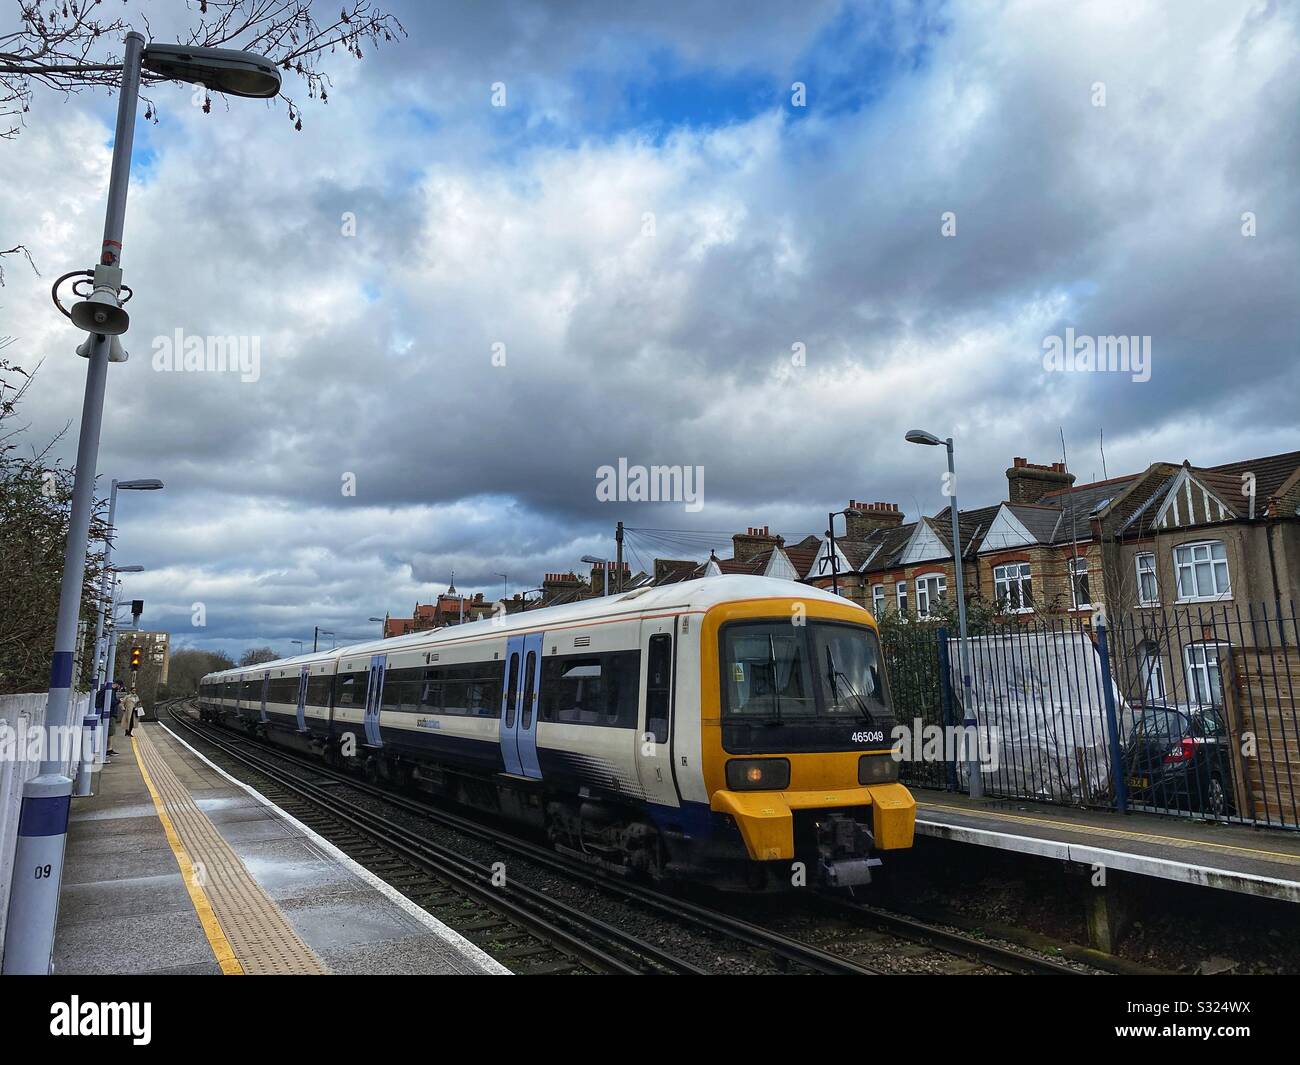 A South Eastern train approaches the platform at Catford Bridge station in London, England January 2020 Stock Photo